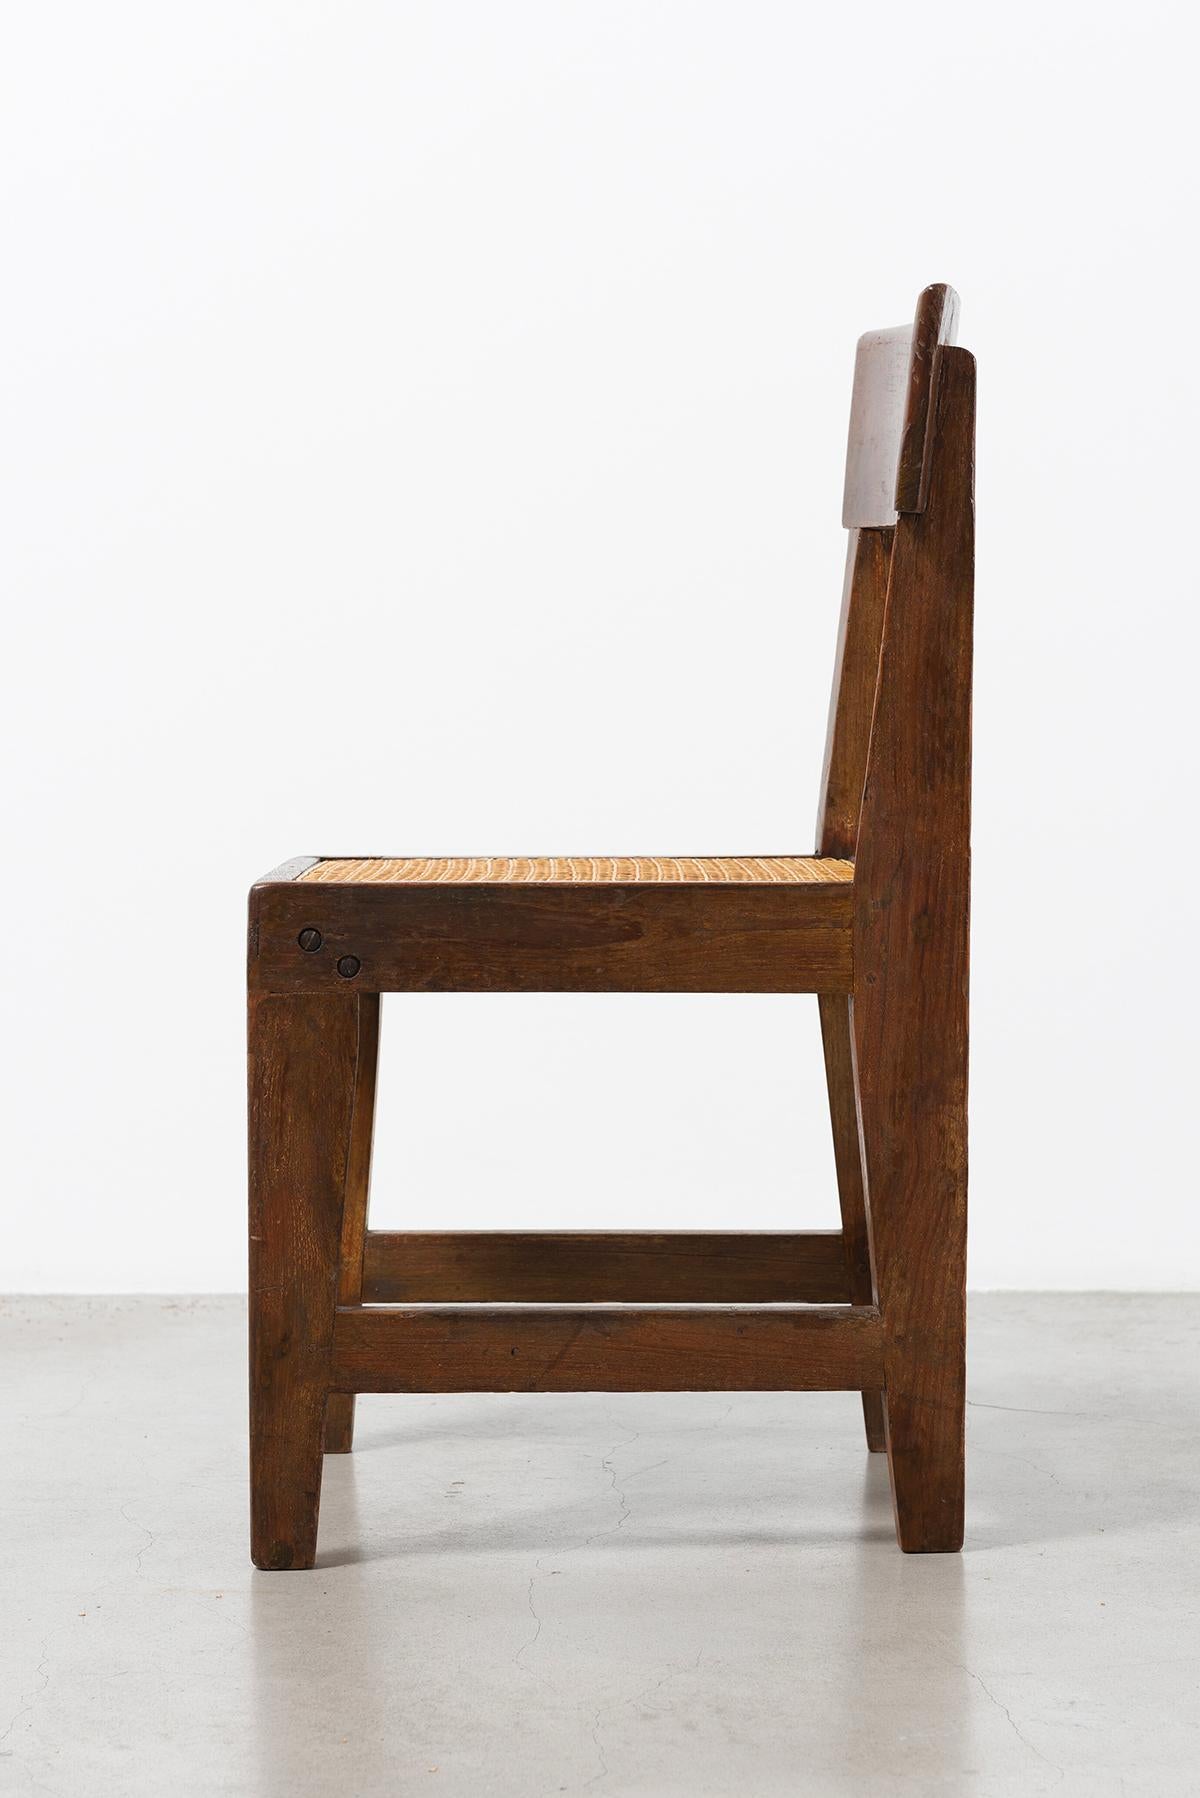 Indian Pierre Jeanneret, Chair, ca. 1955